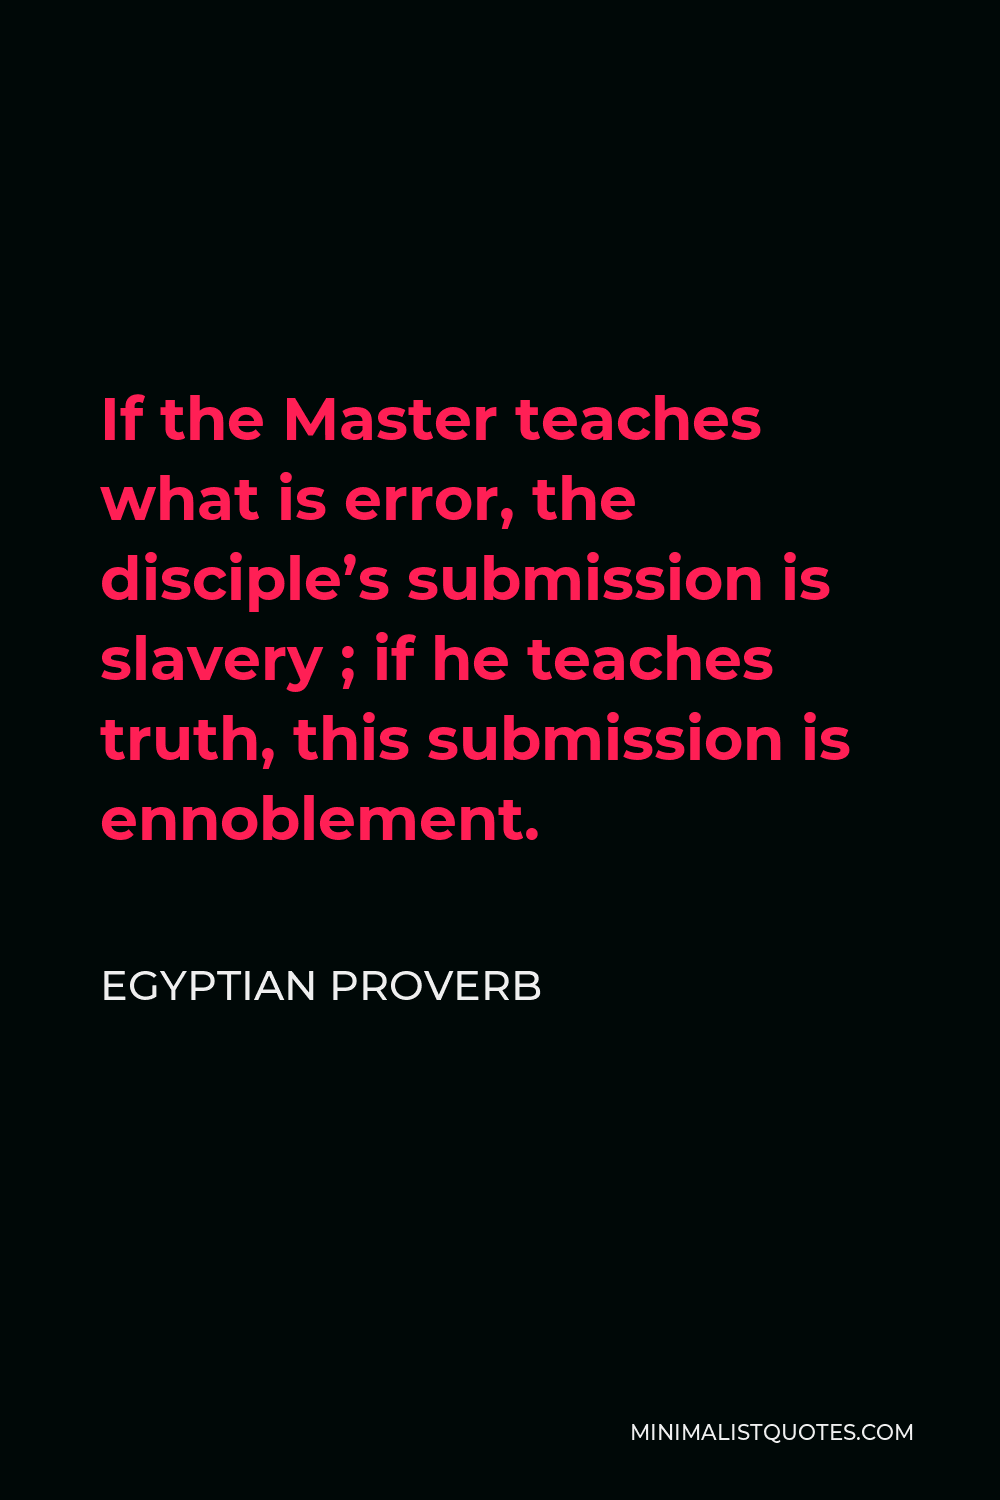 Egyptian Proverb Quote - If the Master teaches what is error, the disciple’s submission is slavery ; if he teaches truth, this submission is ennoblement.